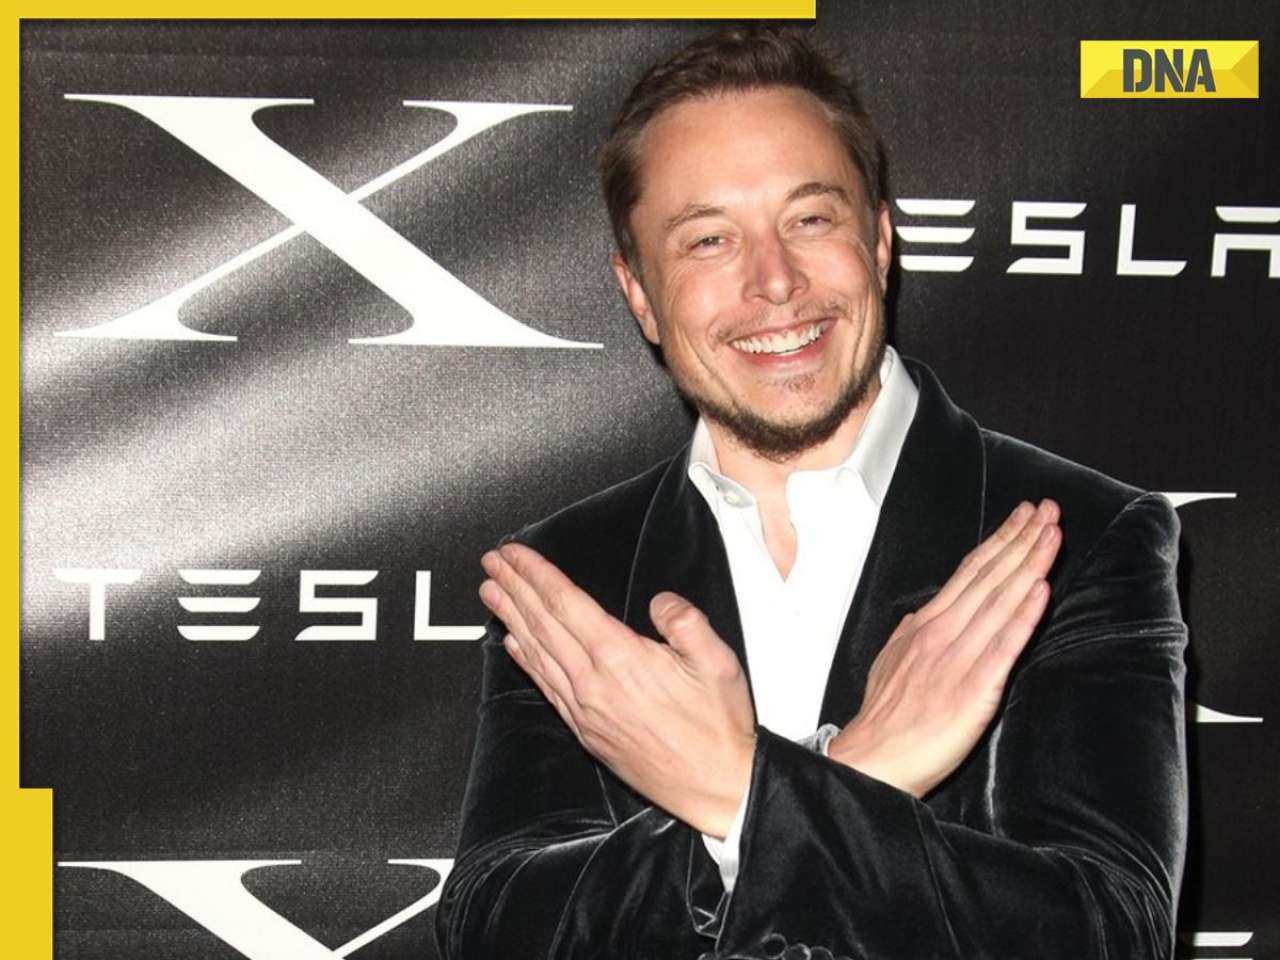 Elon Musk: Tesla’s entry in India a natural progression